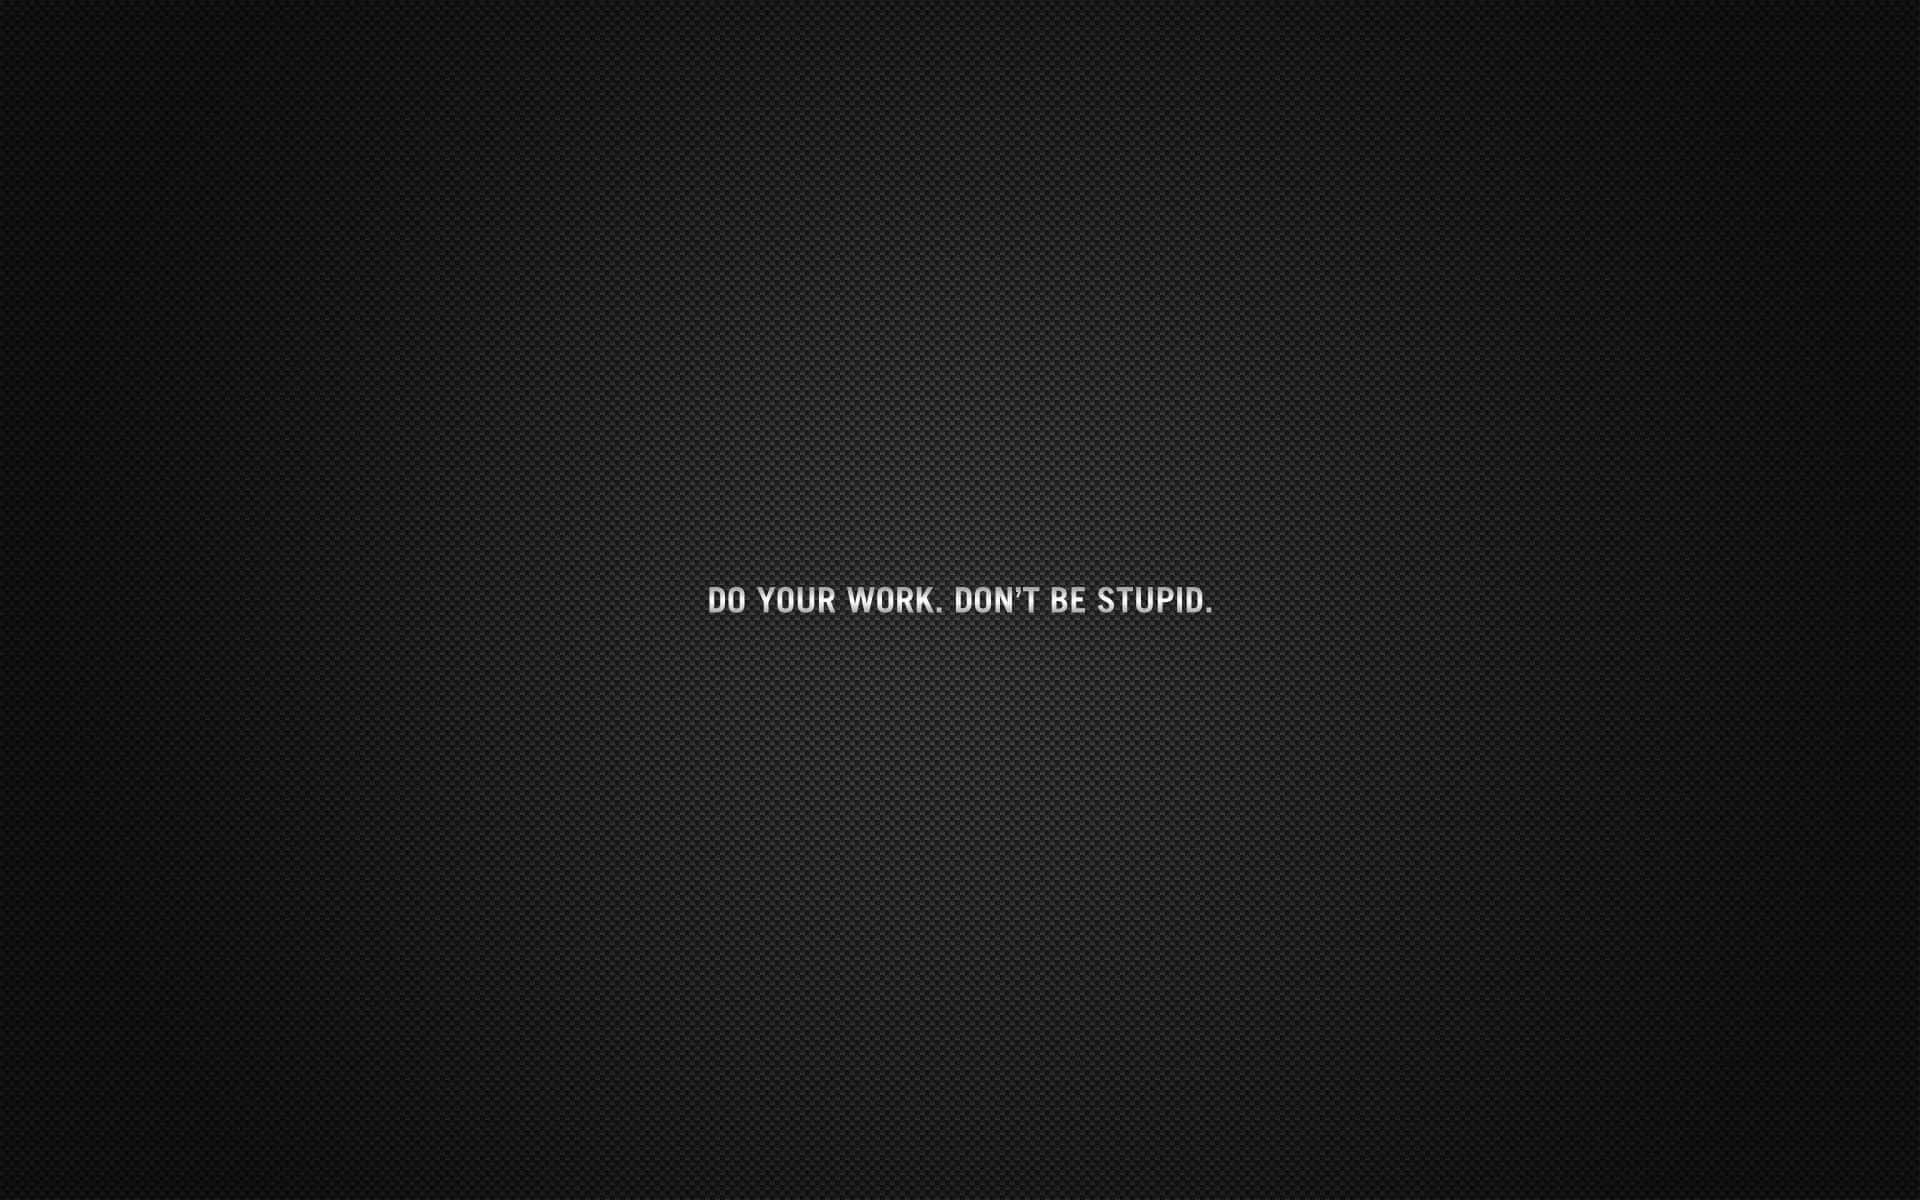 Misc - Motivational Wallpapers and Backgrounds  Desktop wallpaper quotes,  Laptop wallpaper quotes, Desktop wallpaper black